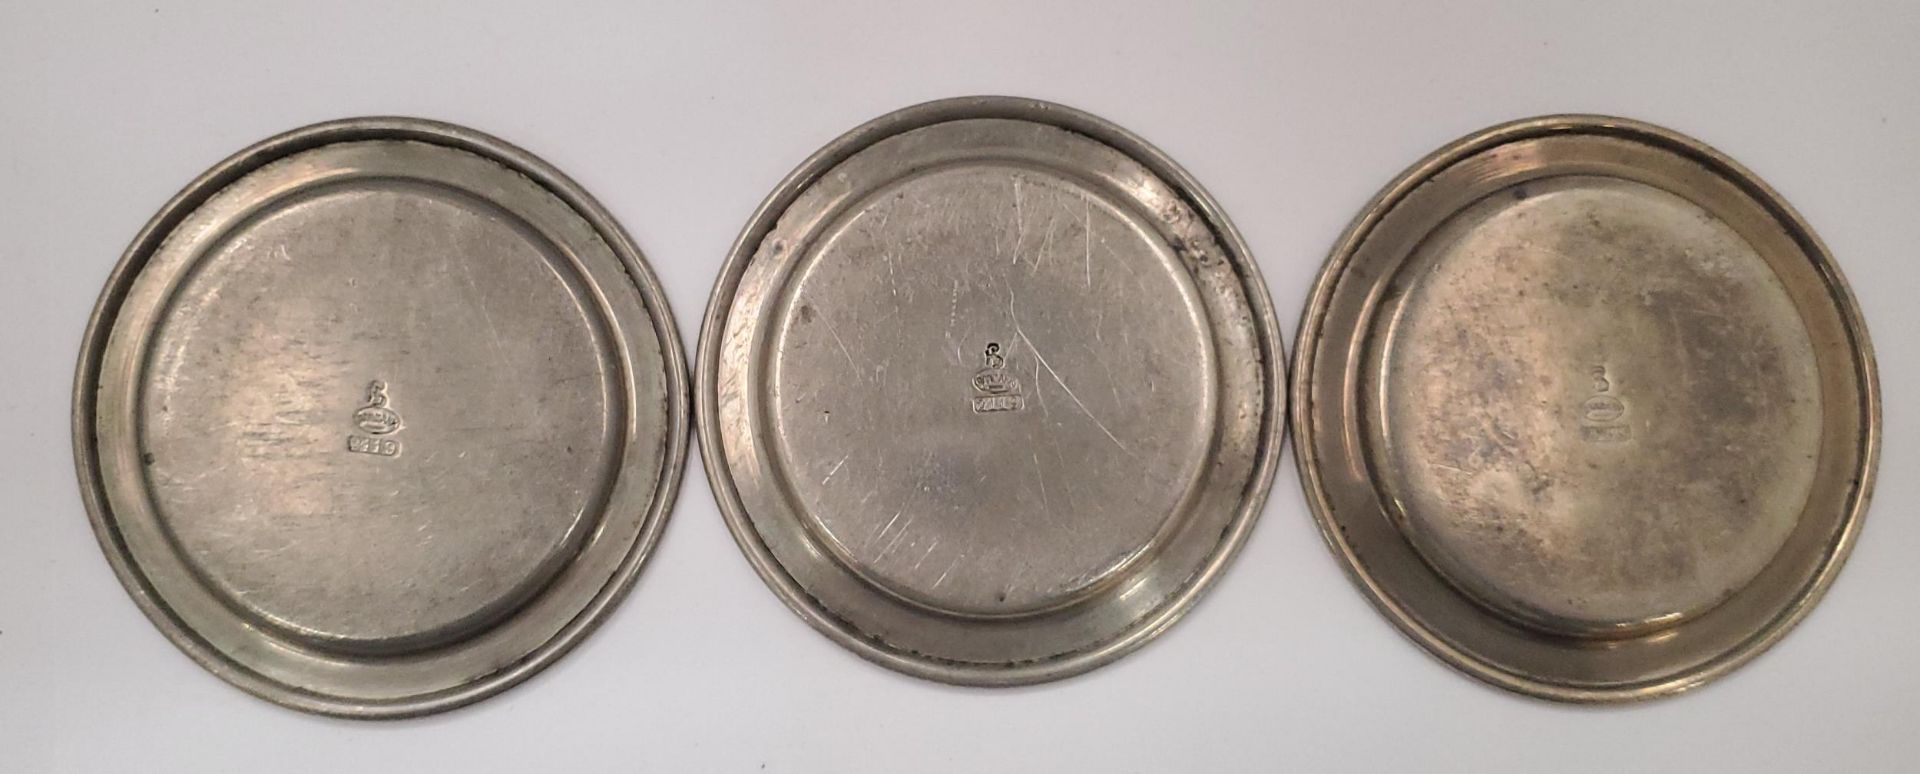 A SET OF FIVE SMALL DANISH PEWTER PIN TRAYS - Image 2 of 3